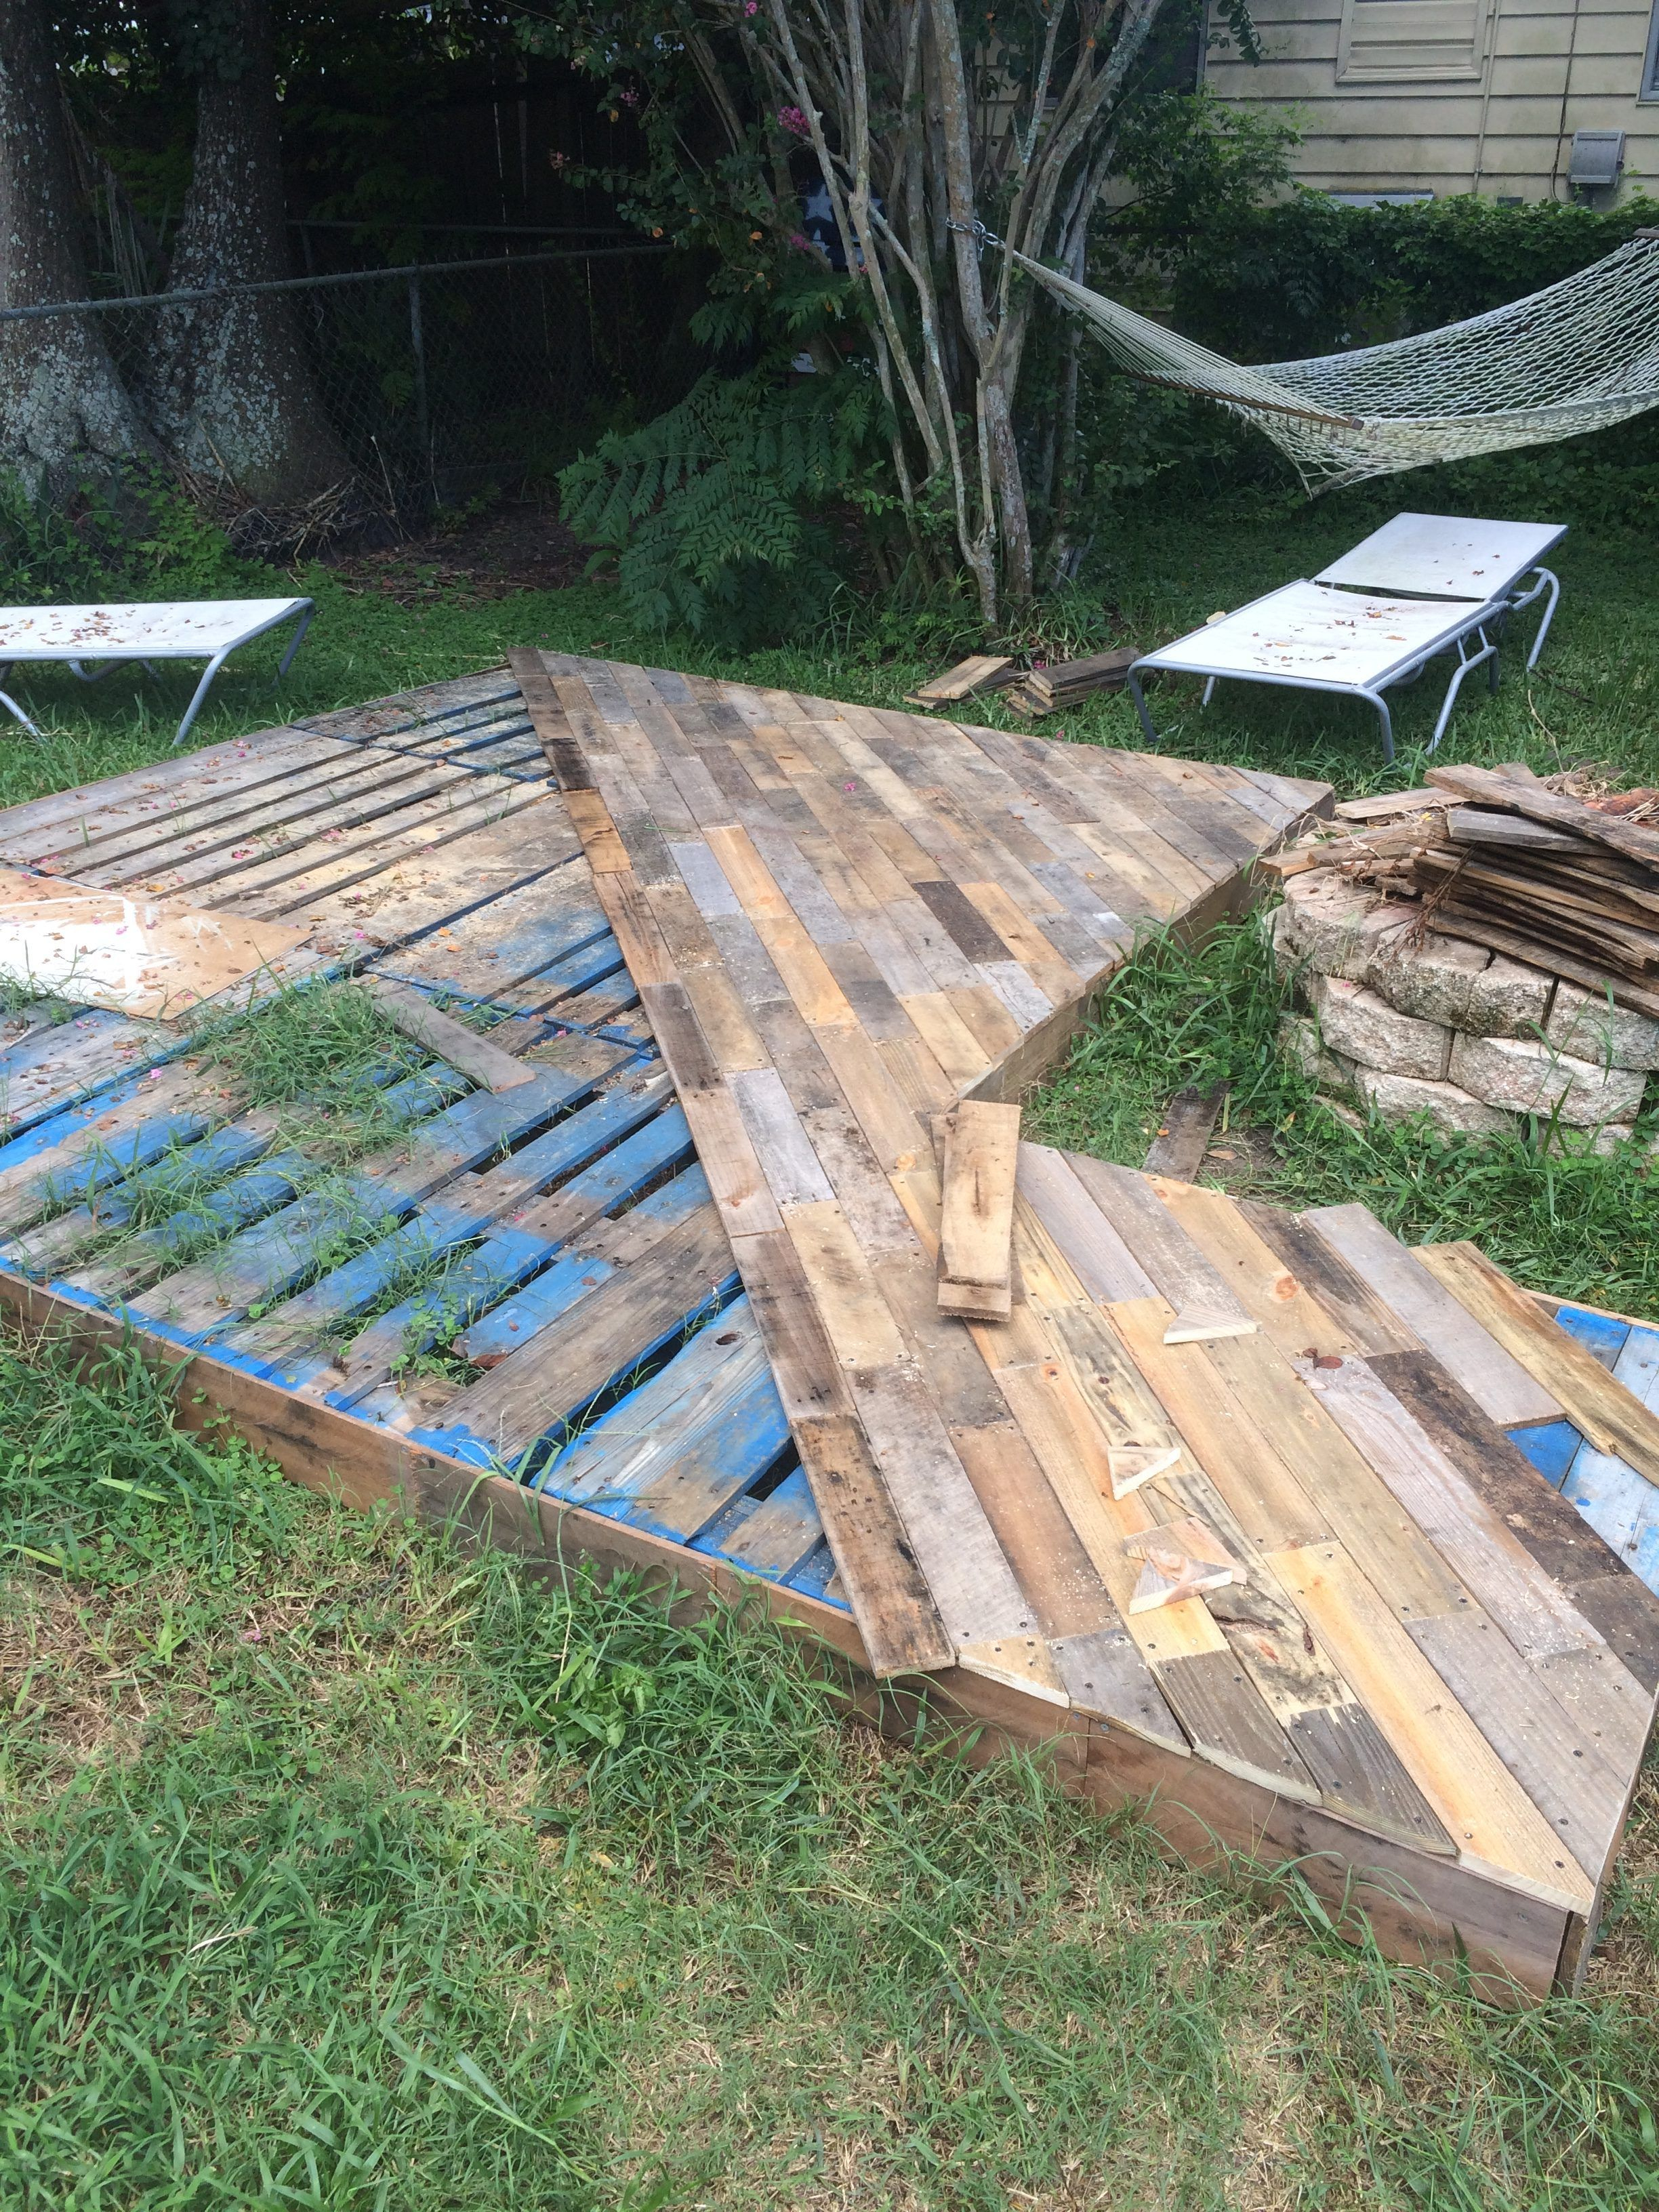 Patio Deck Out Of 25 Wooden Pallets Terassenideen Diy intended for measurements 2448 X 3264